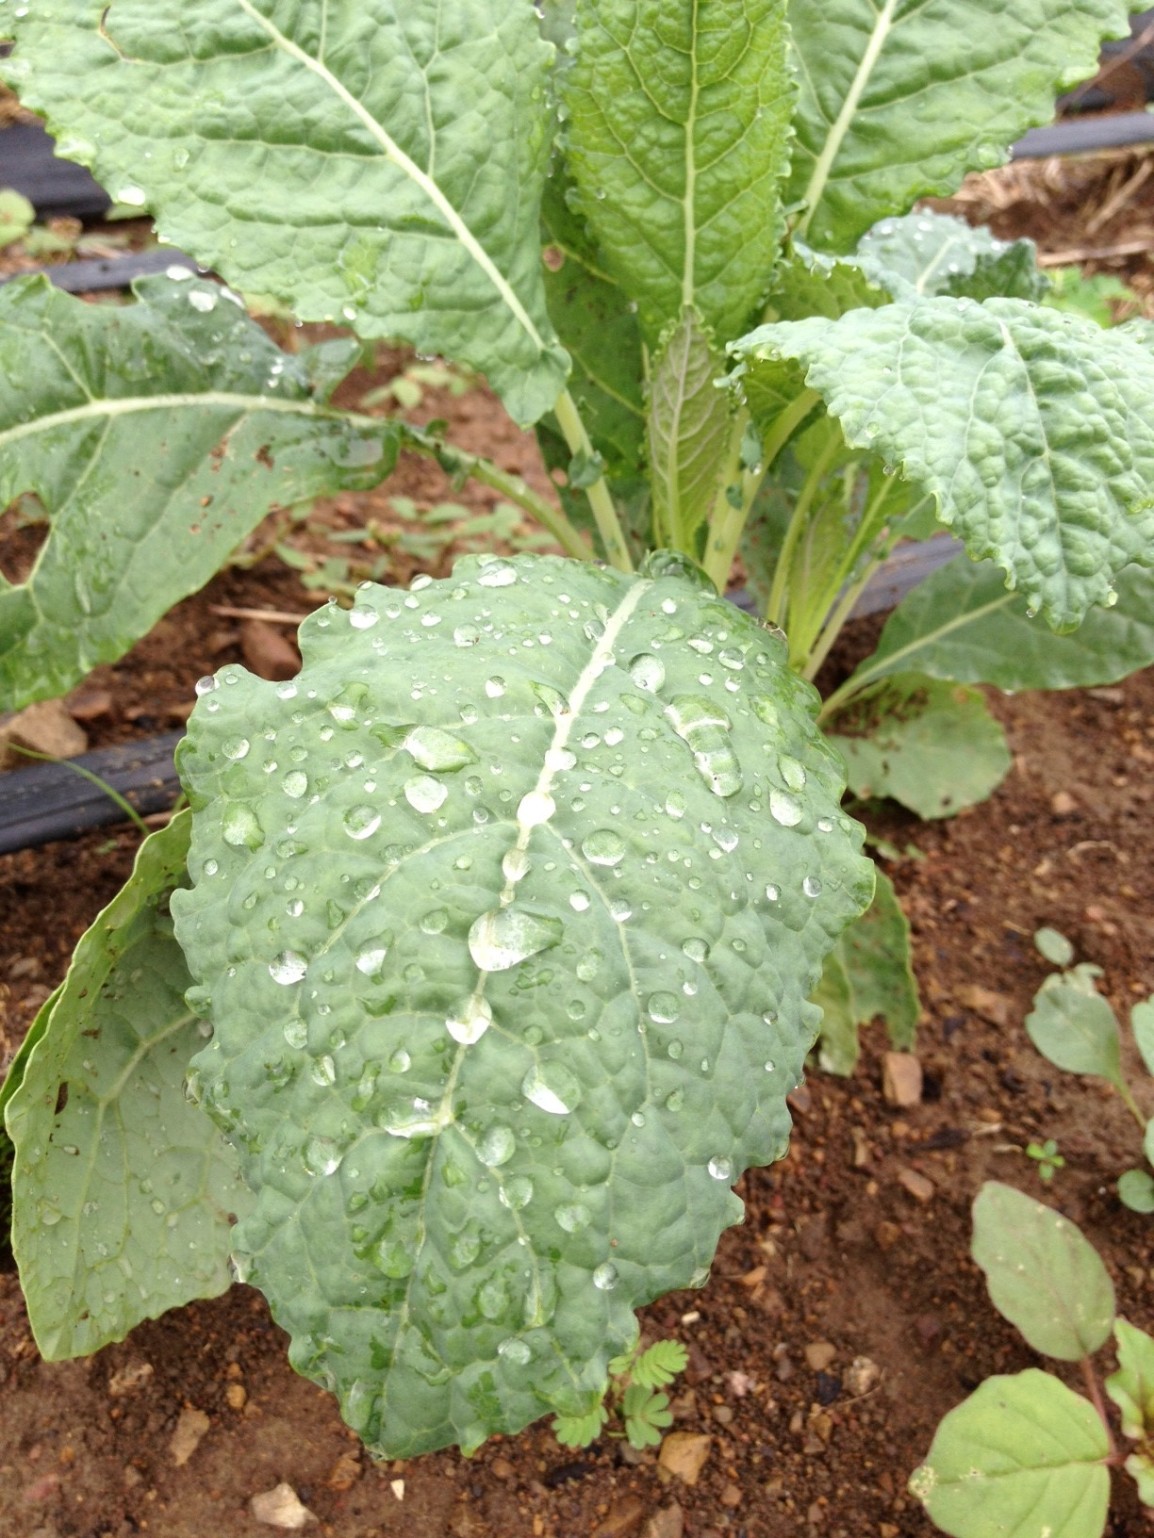 A closeup of a kale plant in the soil, leaves covered in jewel-like drops of dew.